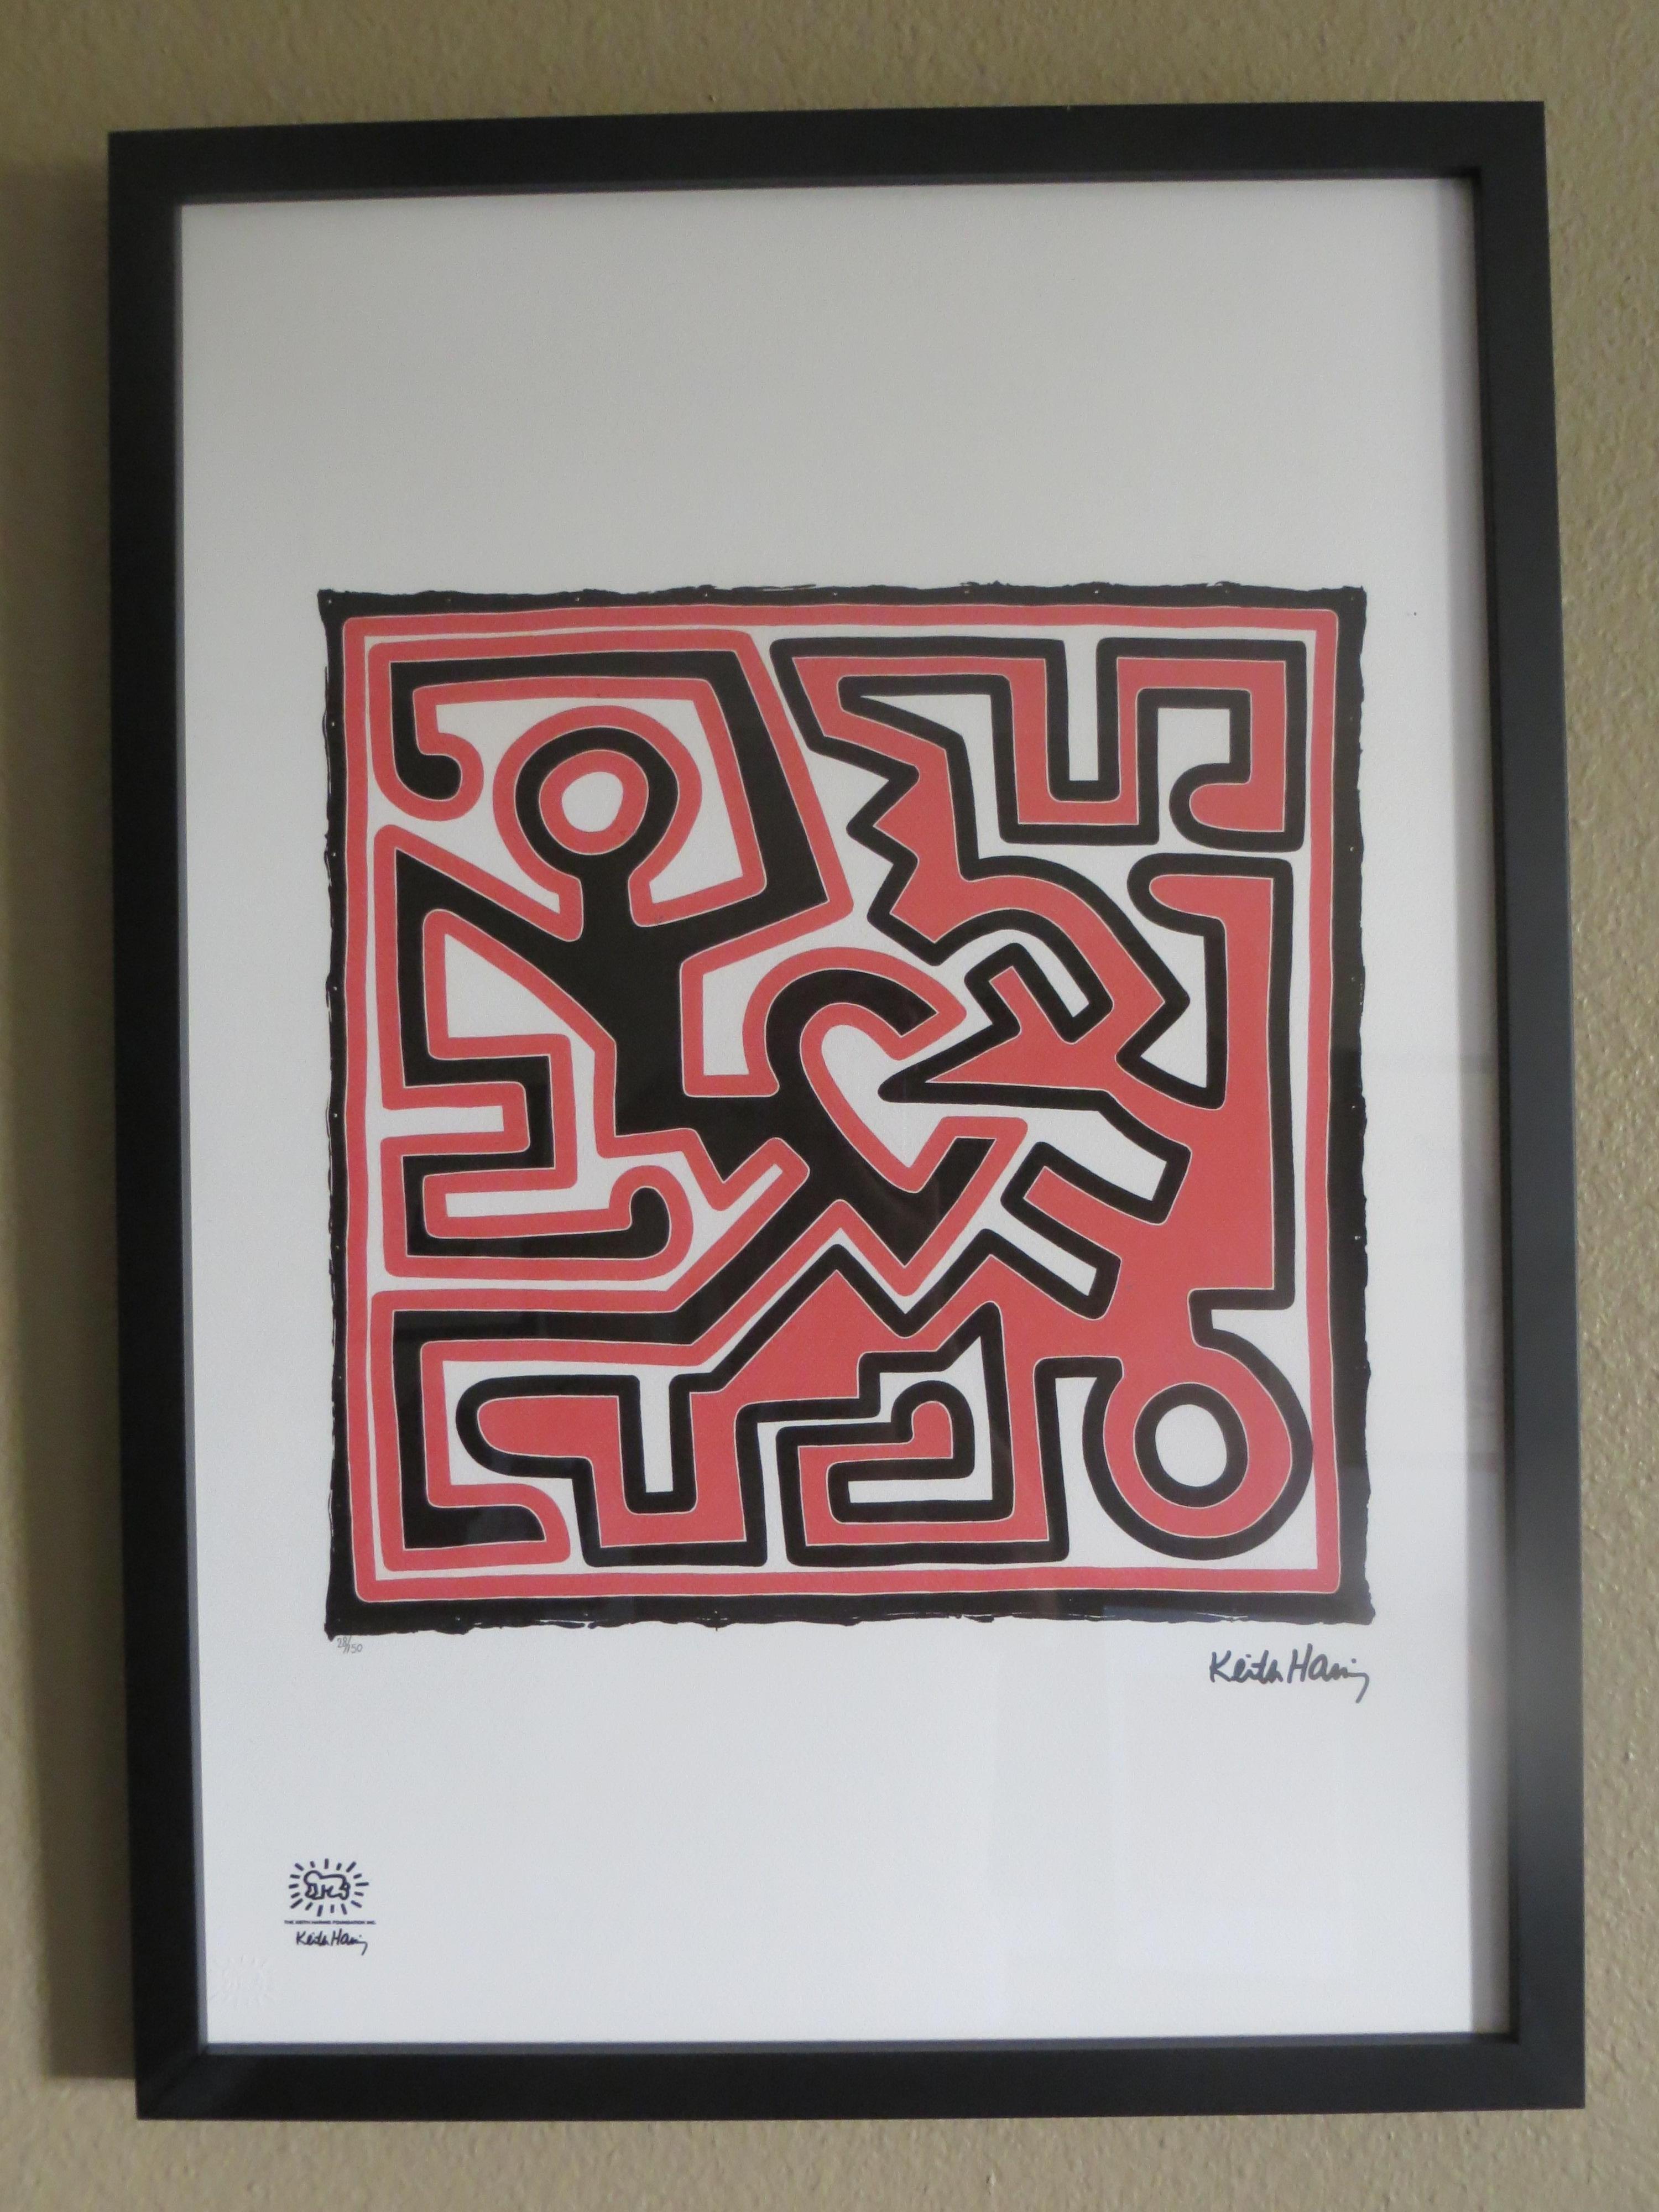 (after) Keith Haring Print -   After Keith Haring,  Lithograph, Numbered  28/150